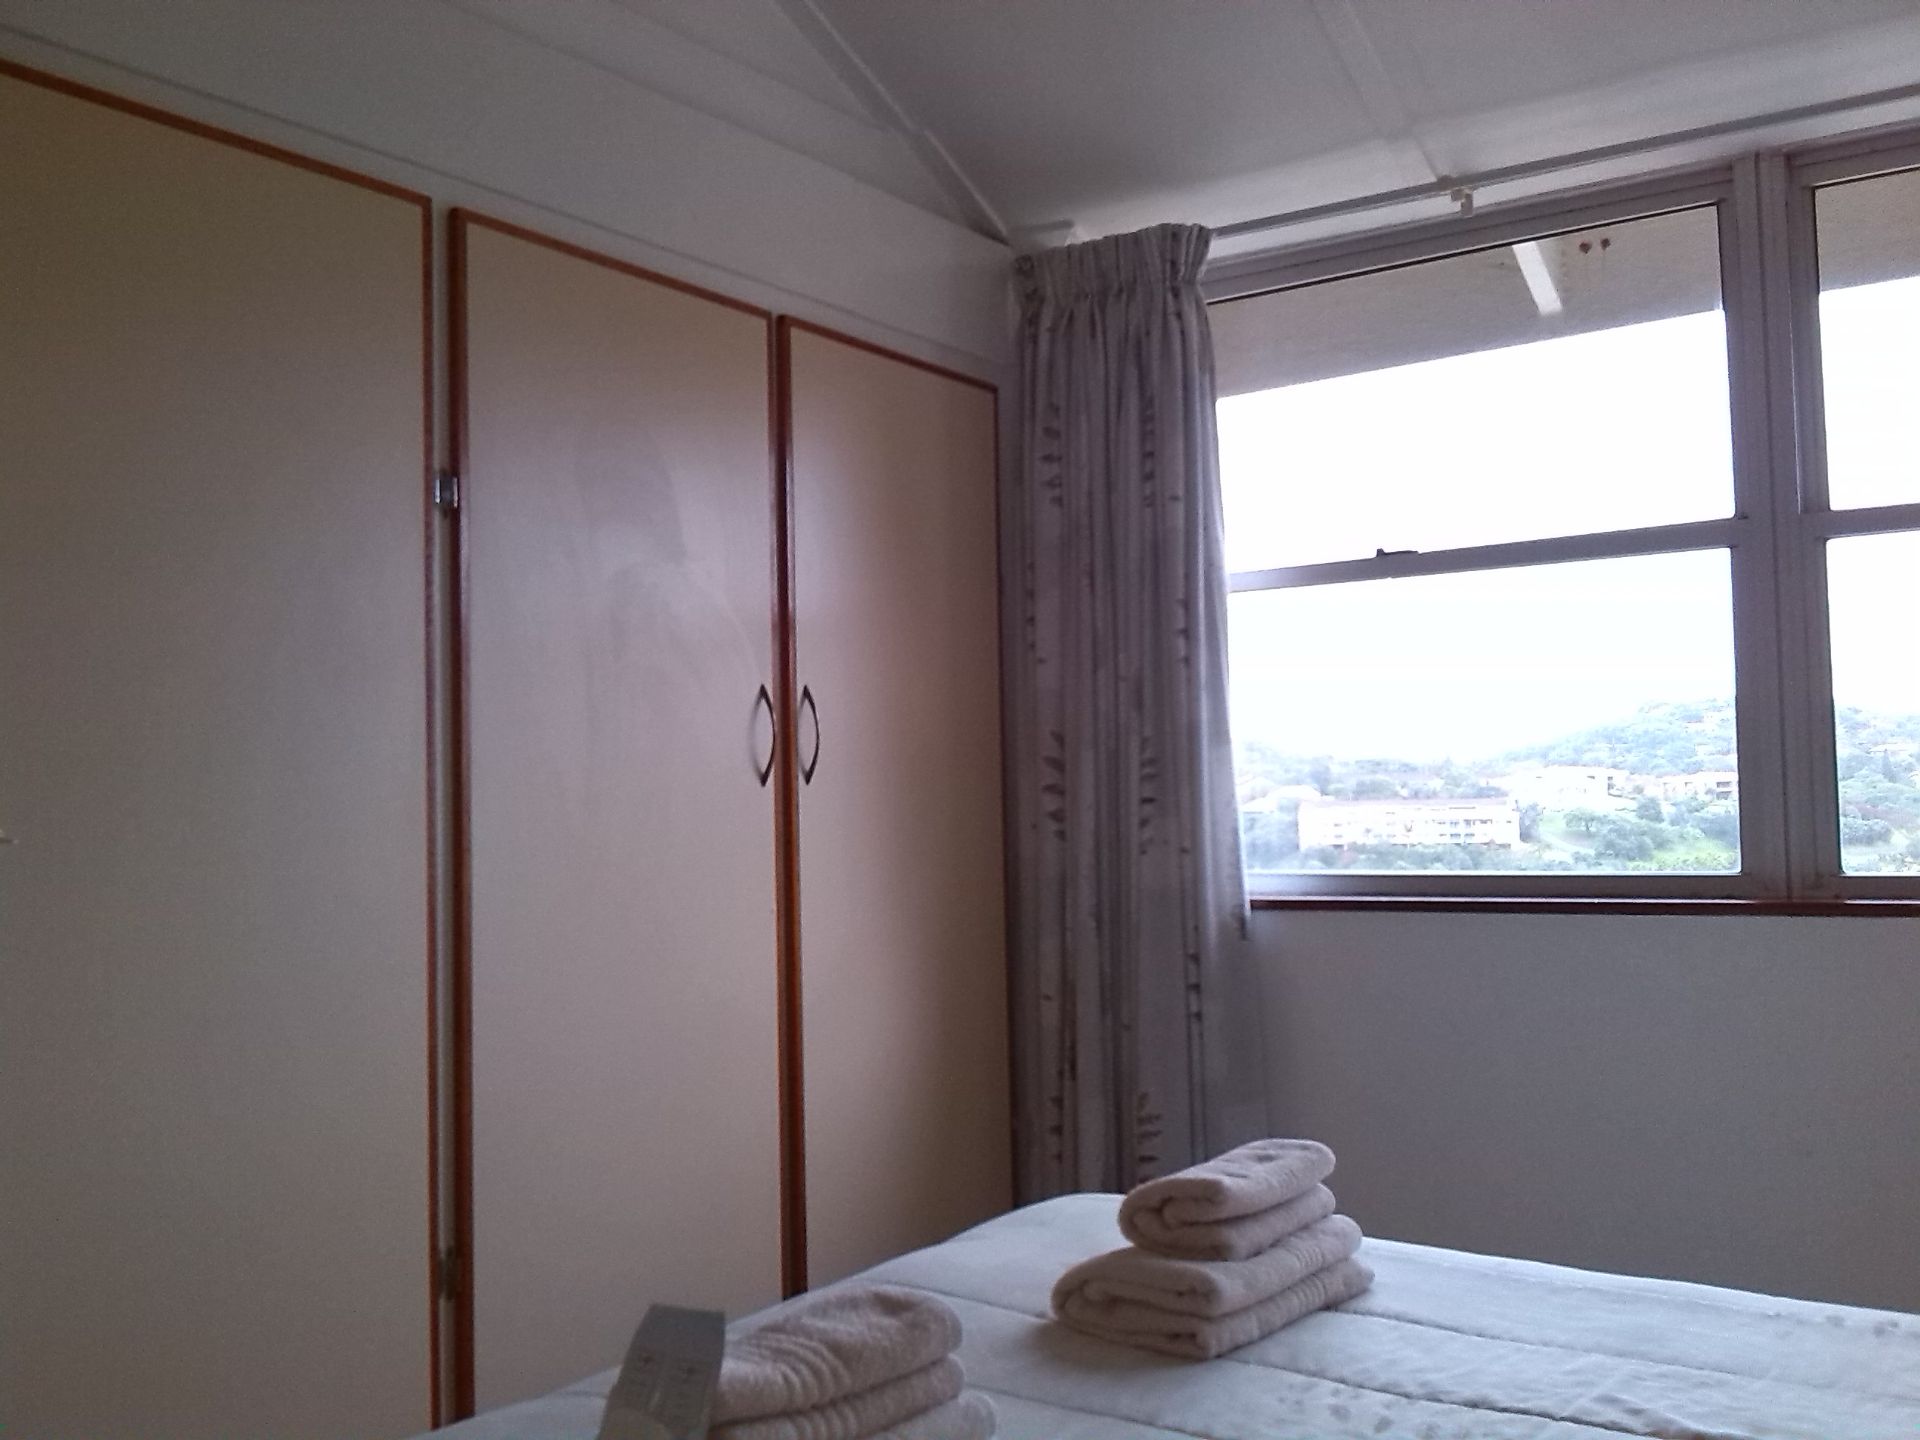 Pearly Shells - 2 Beds (6 Sleepers Max) . Date - 06/05/2016 - 13/05/2016 - (Shareblock) - Image 17 of 32